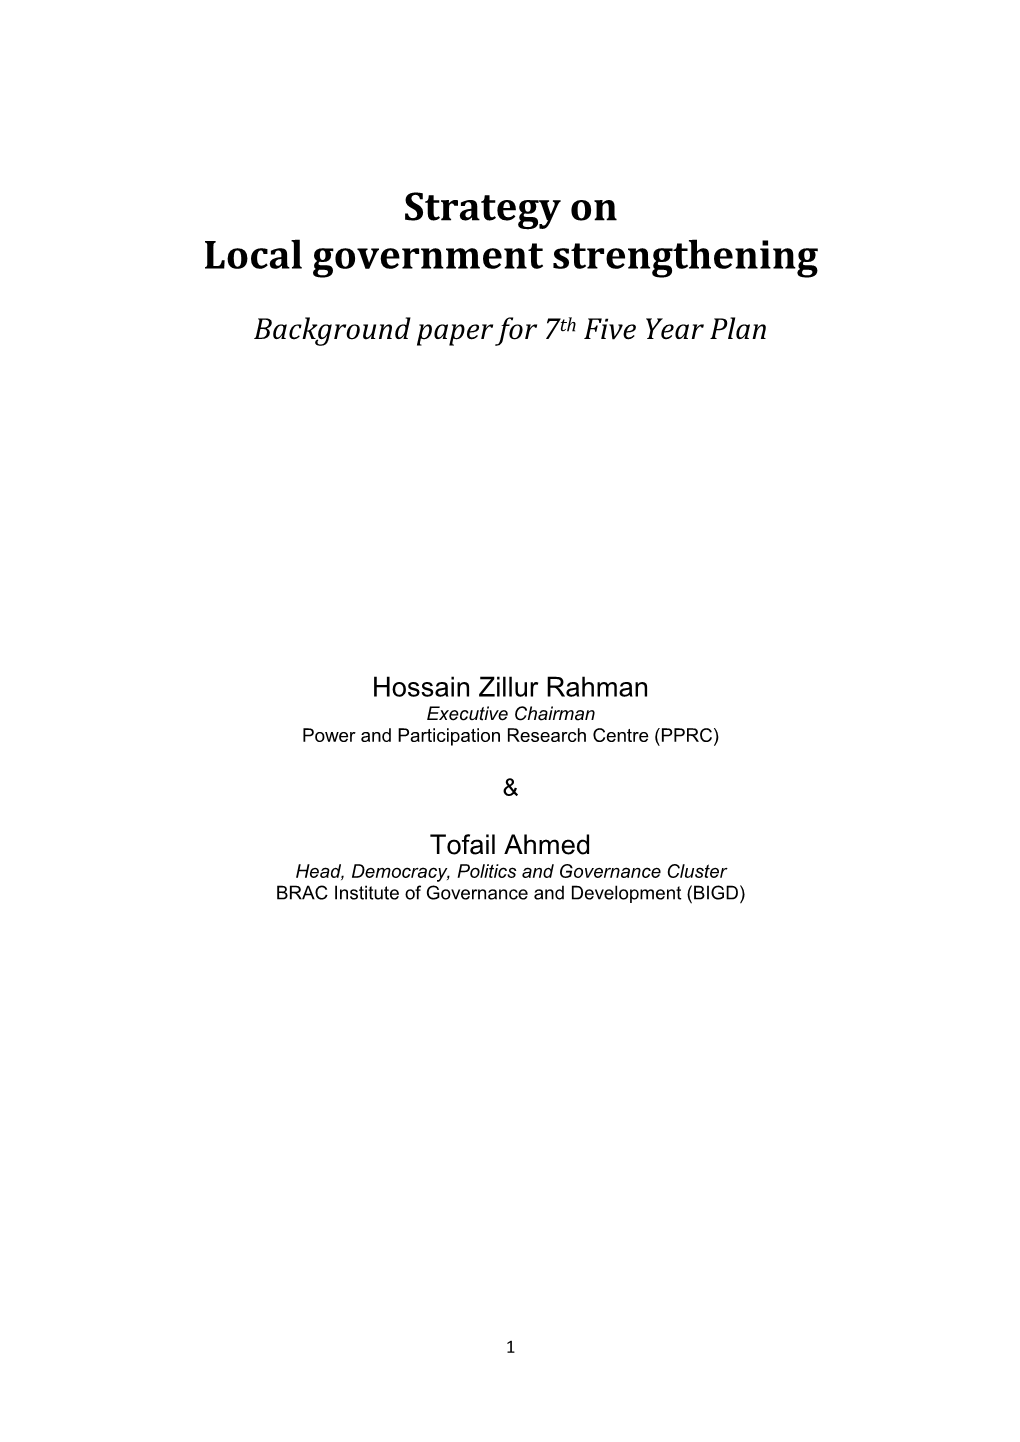 Strategy on Local Government Strengthening